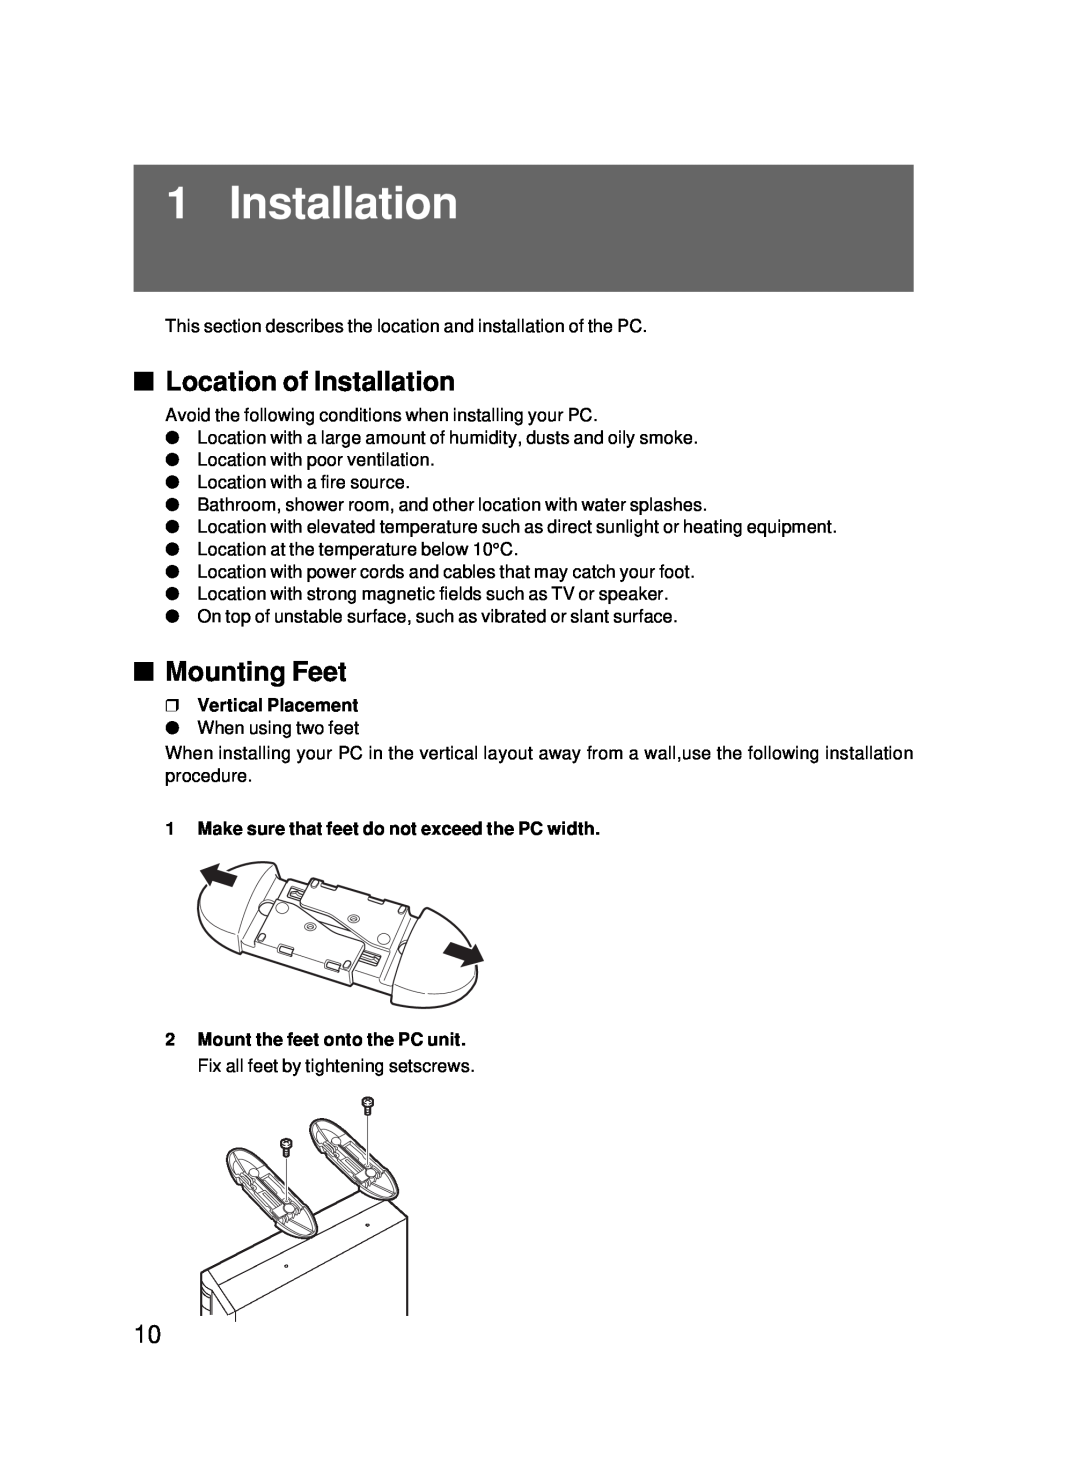 Fujitsu 5000 user manual Location of Installation, Mounting Feet, Vertical Placement 